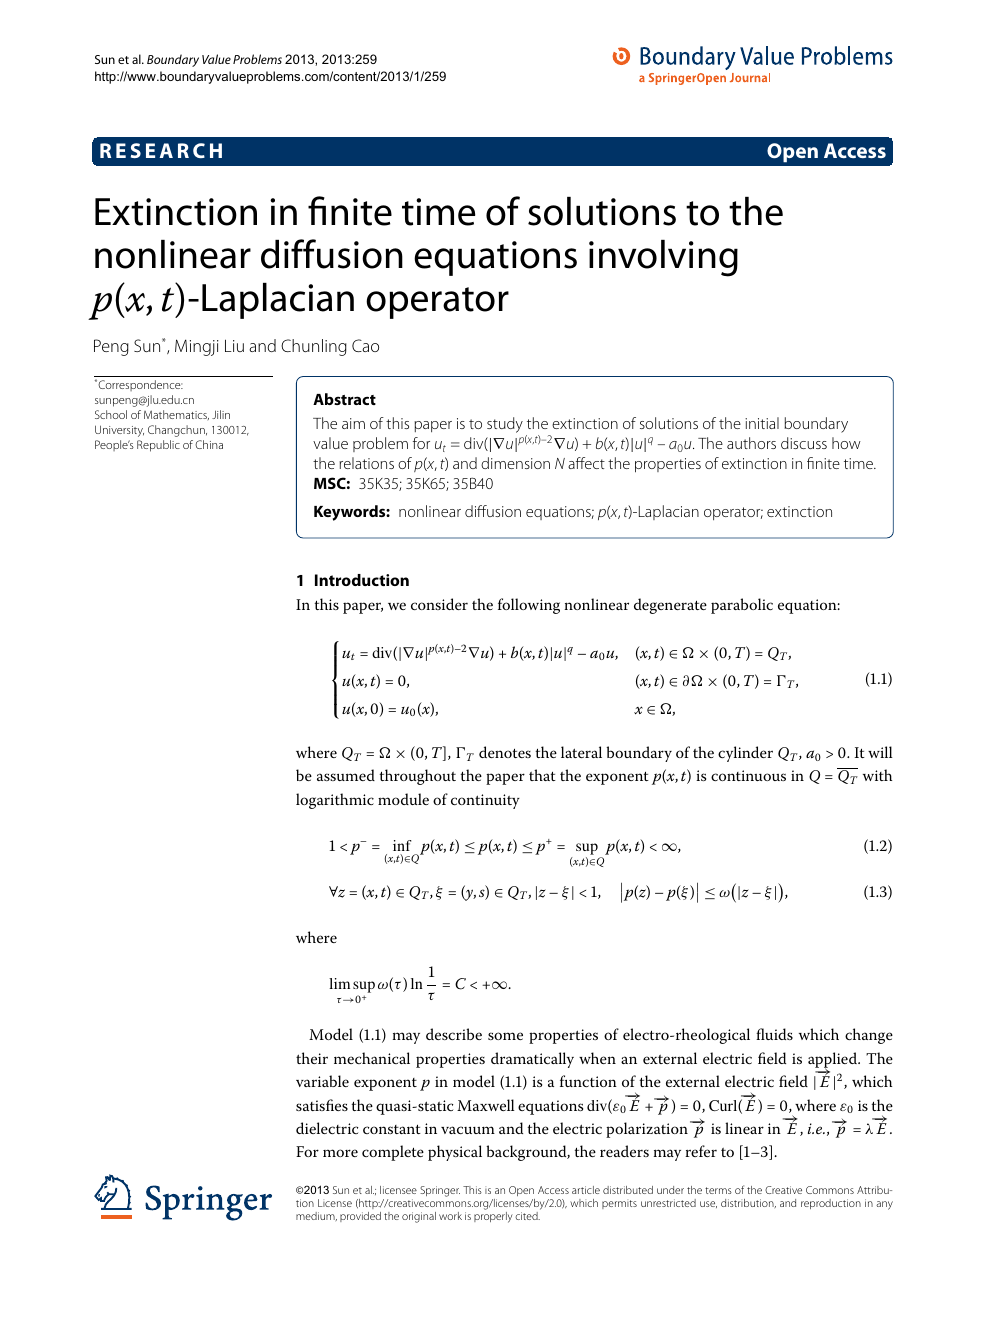 Extinction In Finite Time Of Solutions To The Nonlinear Diffusion Equations Involving P X T Laplacian Operator Topic Of Research Paper In Mathematics Download Scholarly Article Pdf And Read For Free On Cyberleninka Open